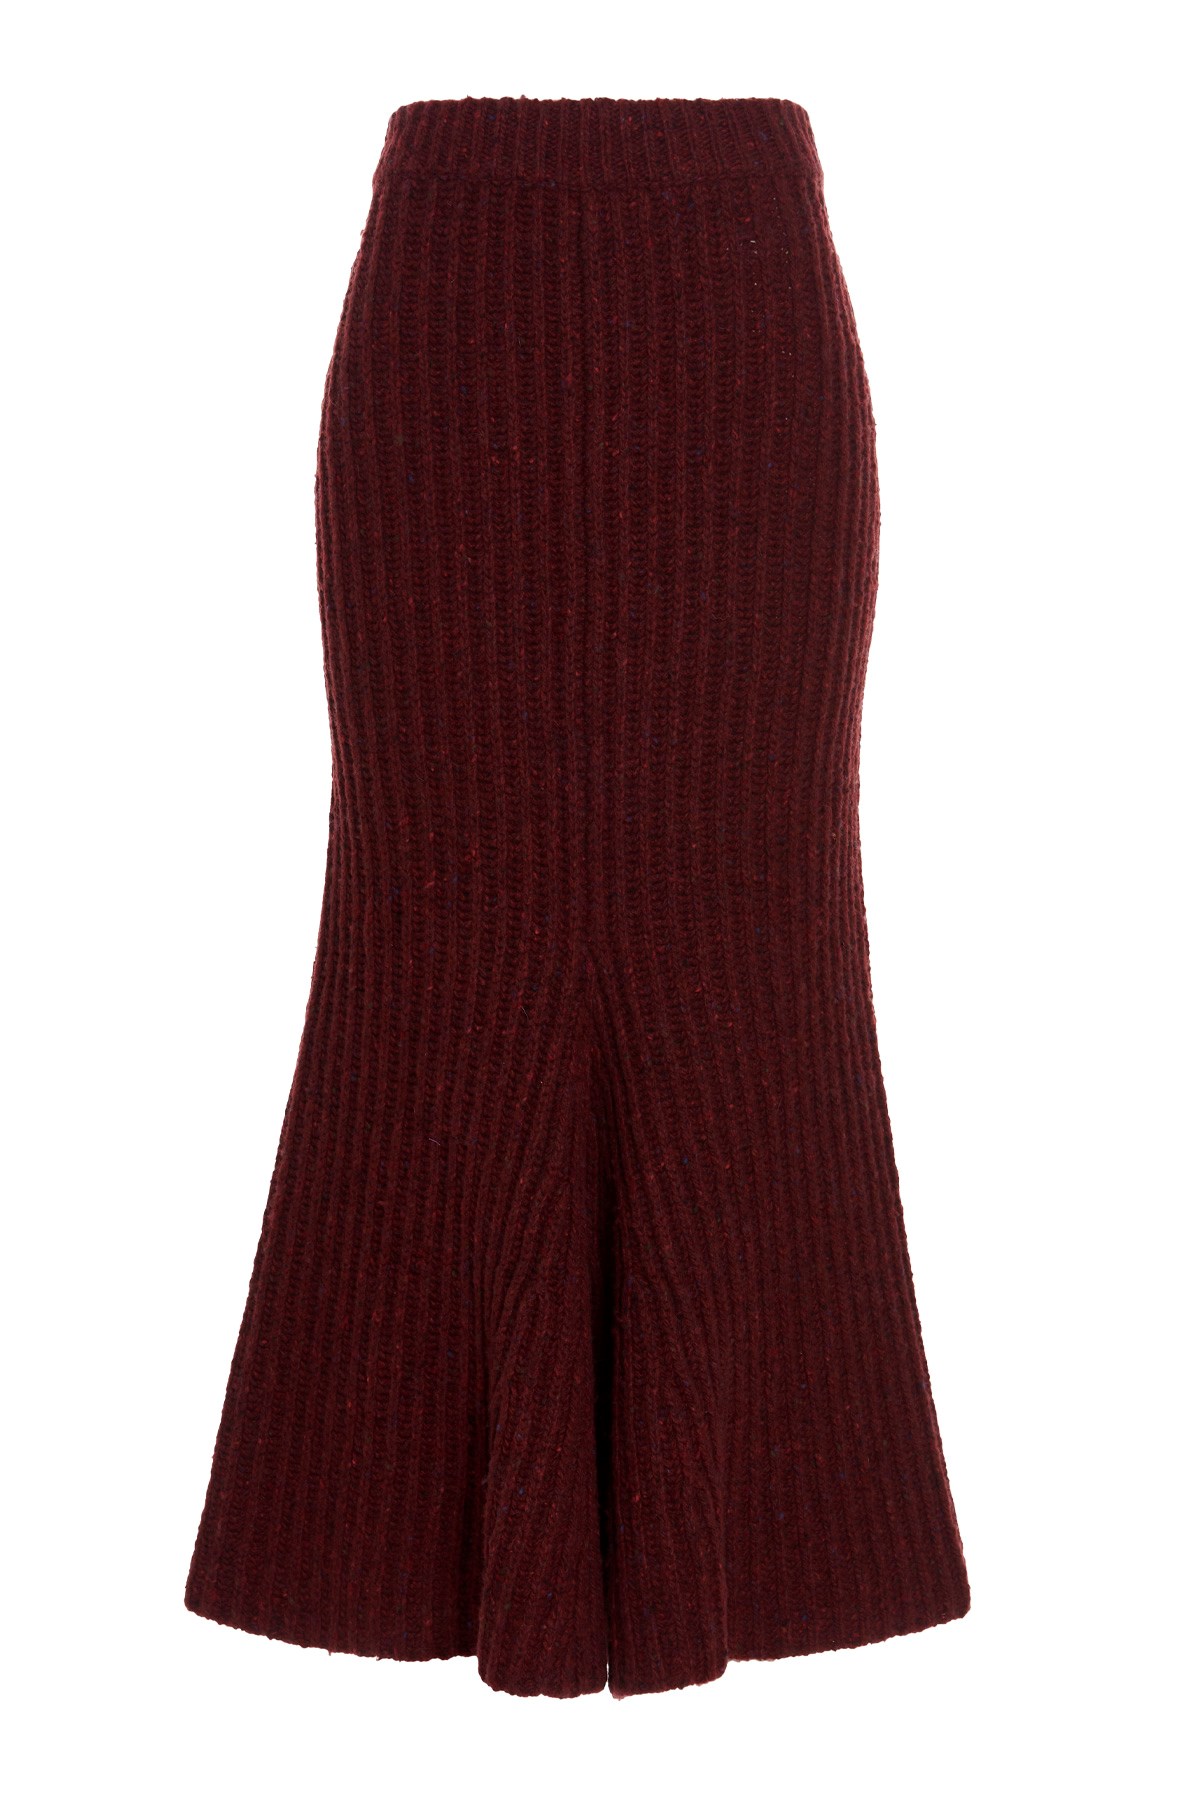 MARNI Recycled Wool Knitted Skirt